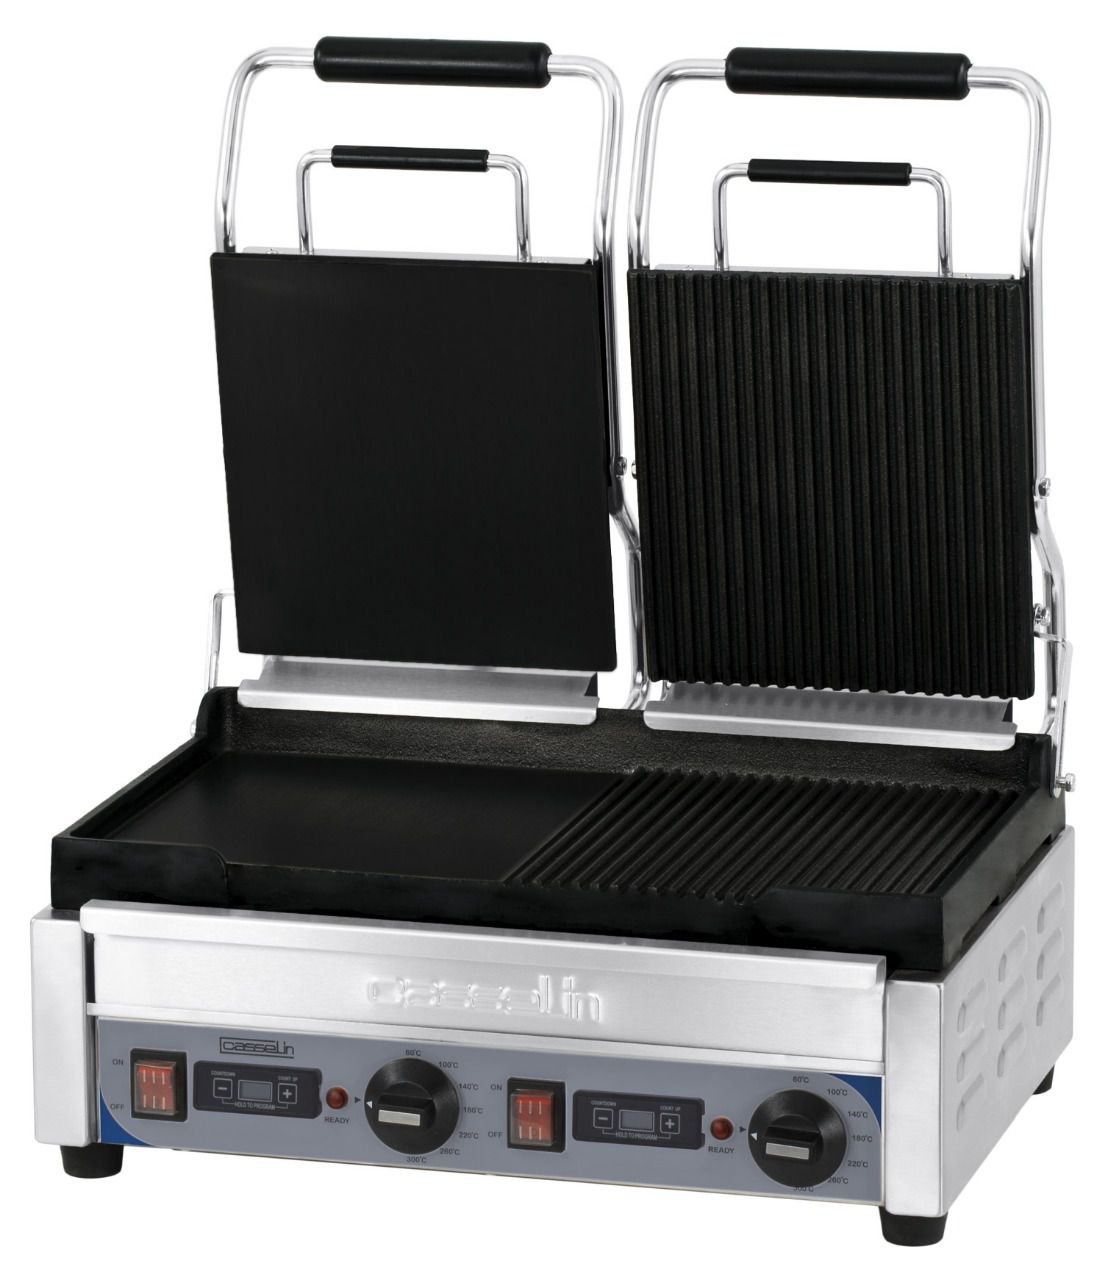 Grill Panini double Mixte minuteur, 230v, 2900w